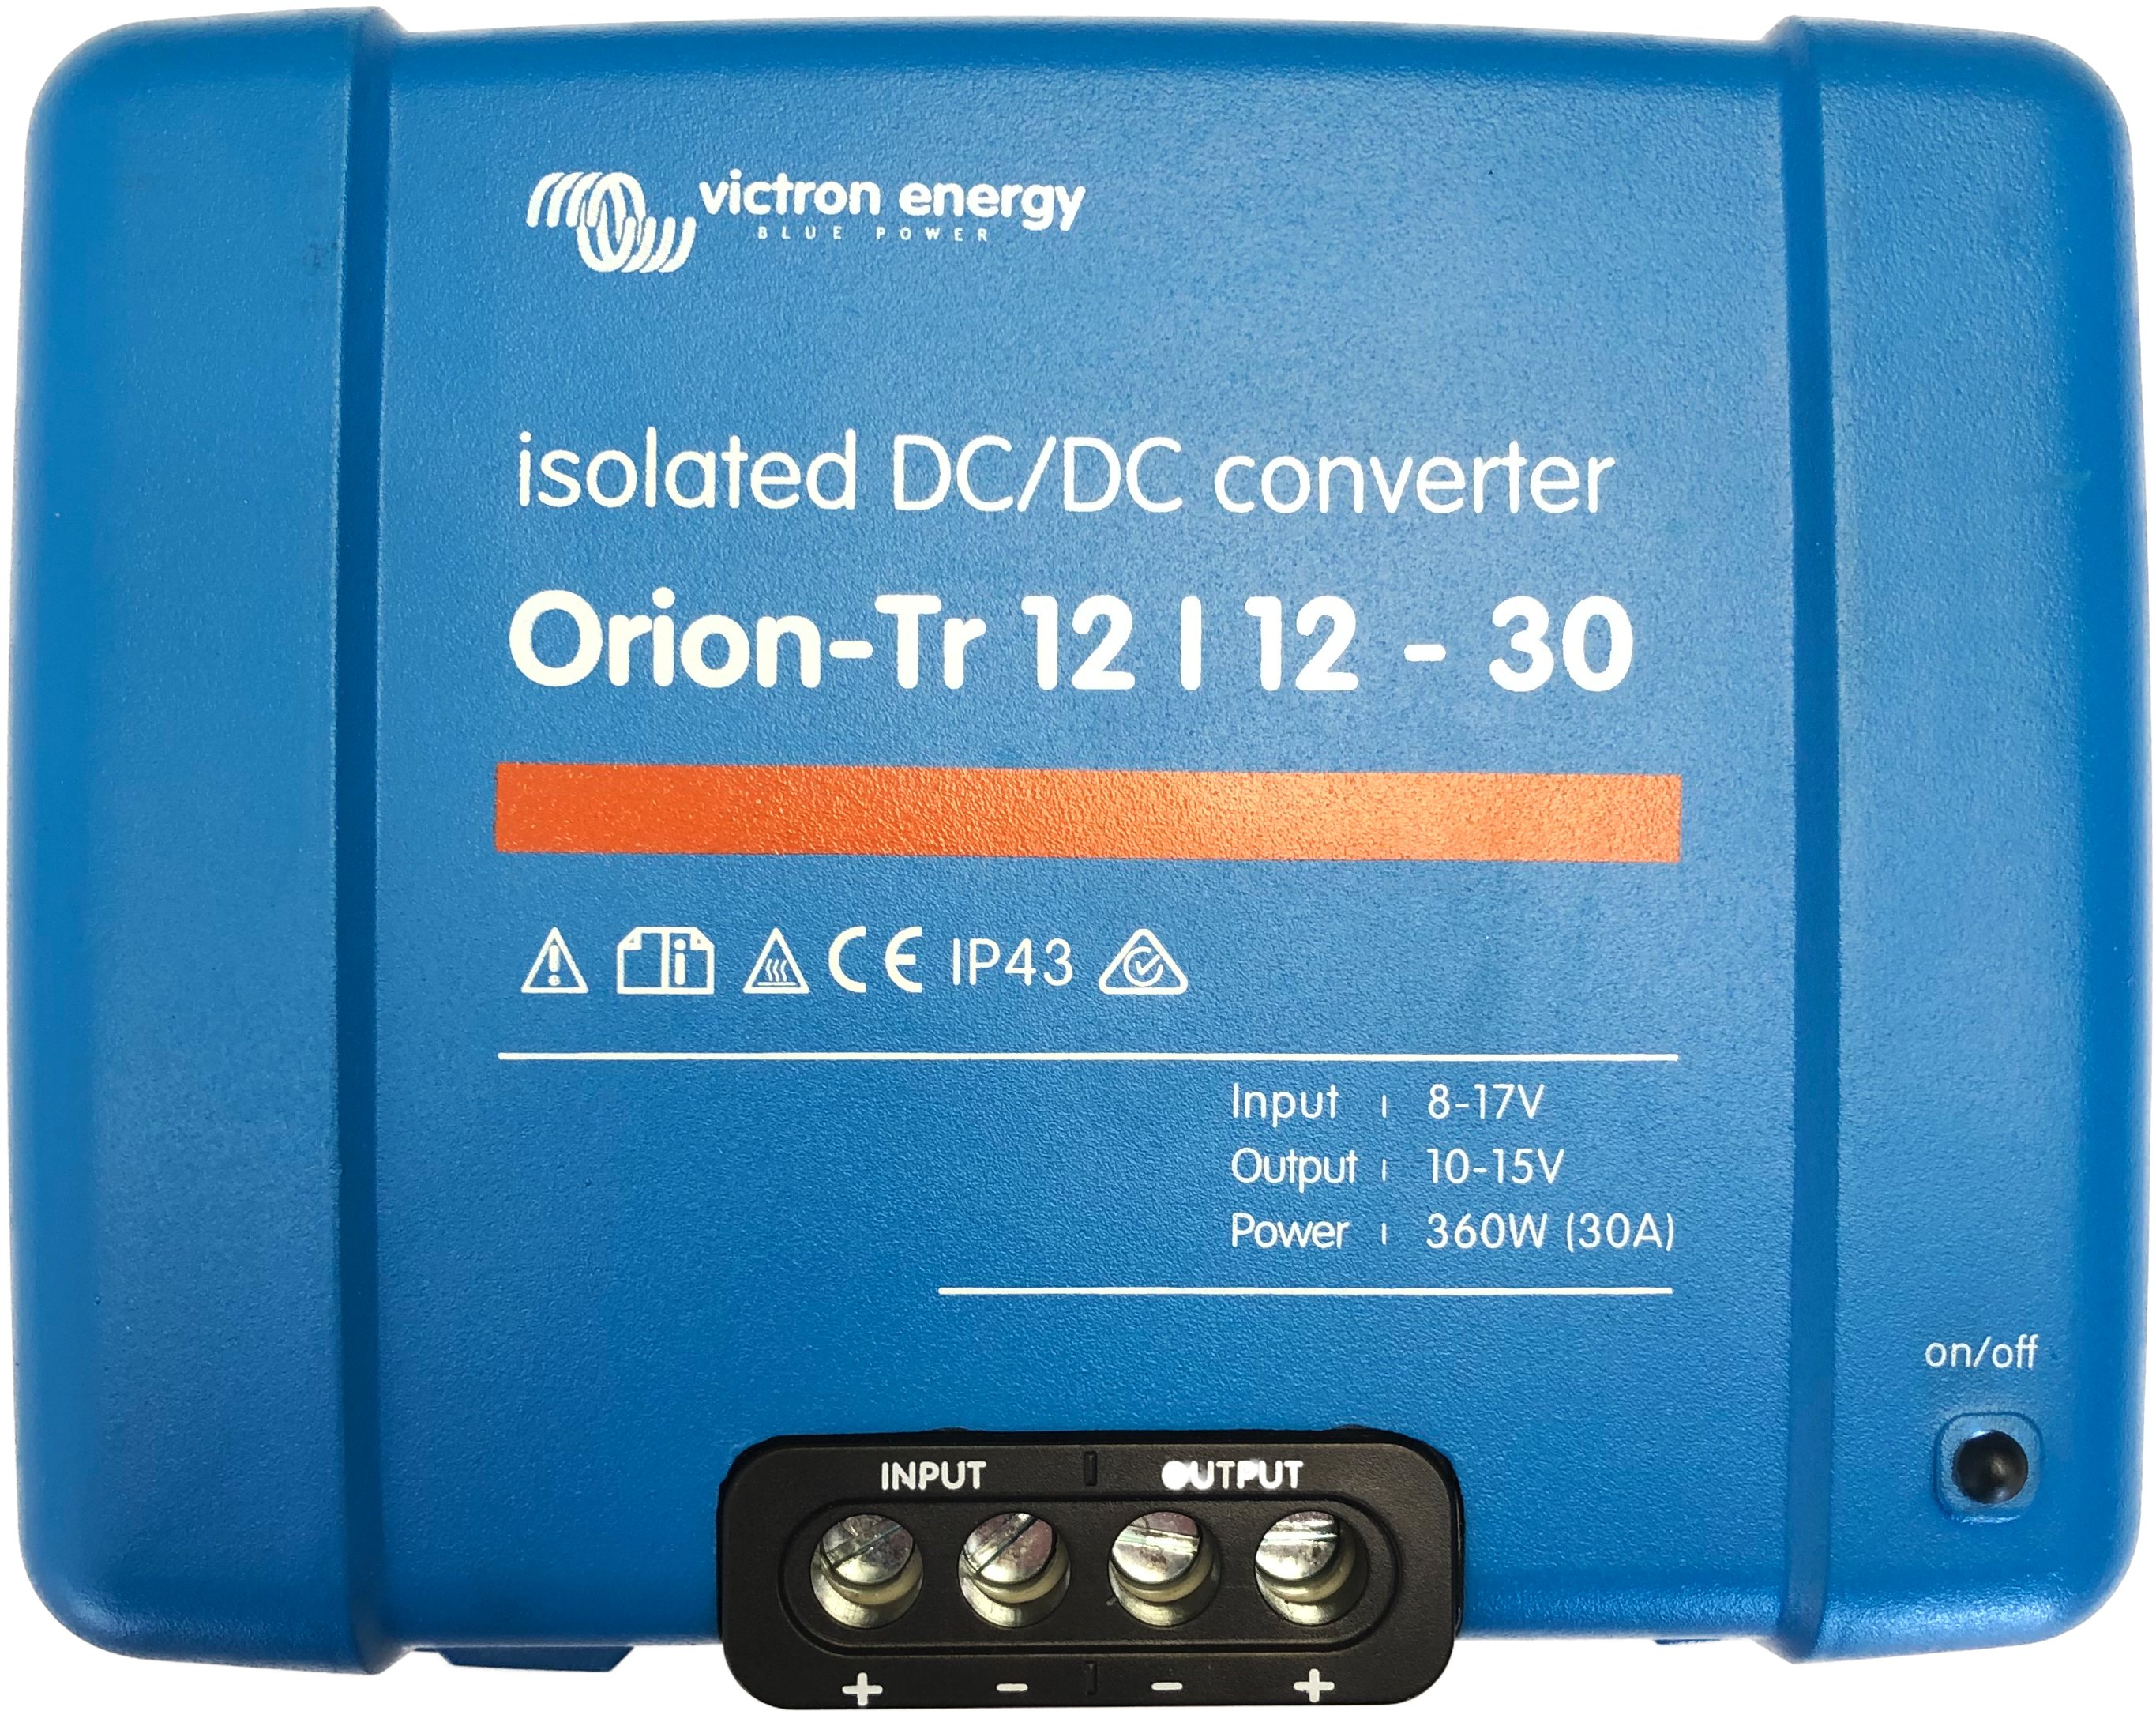 What is the purpose of the isolated dc-dc converter?